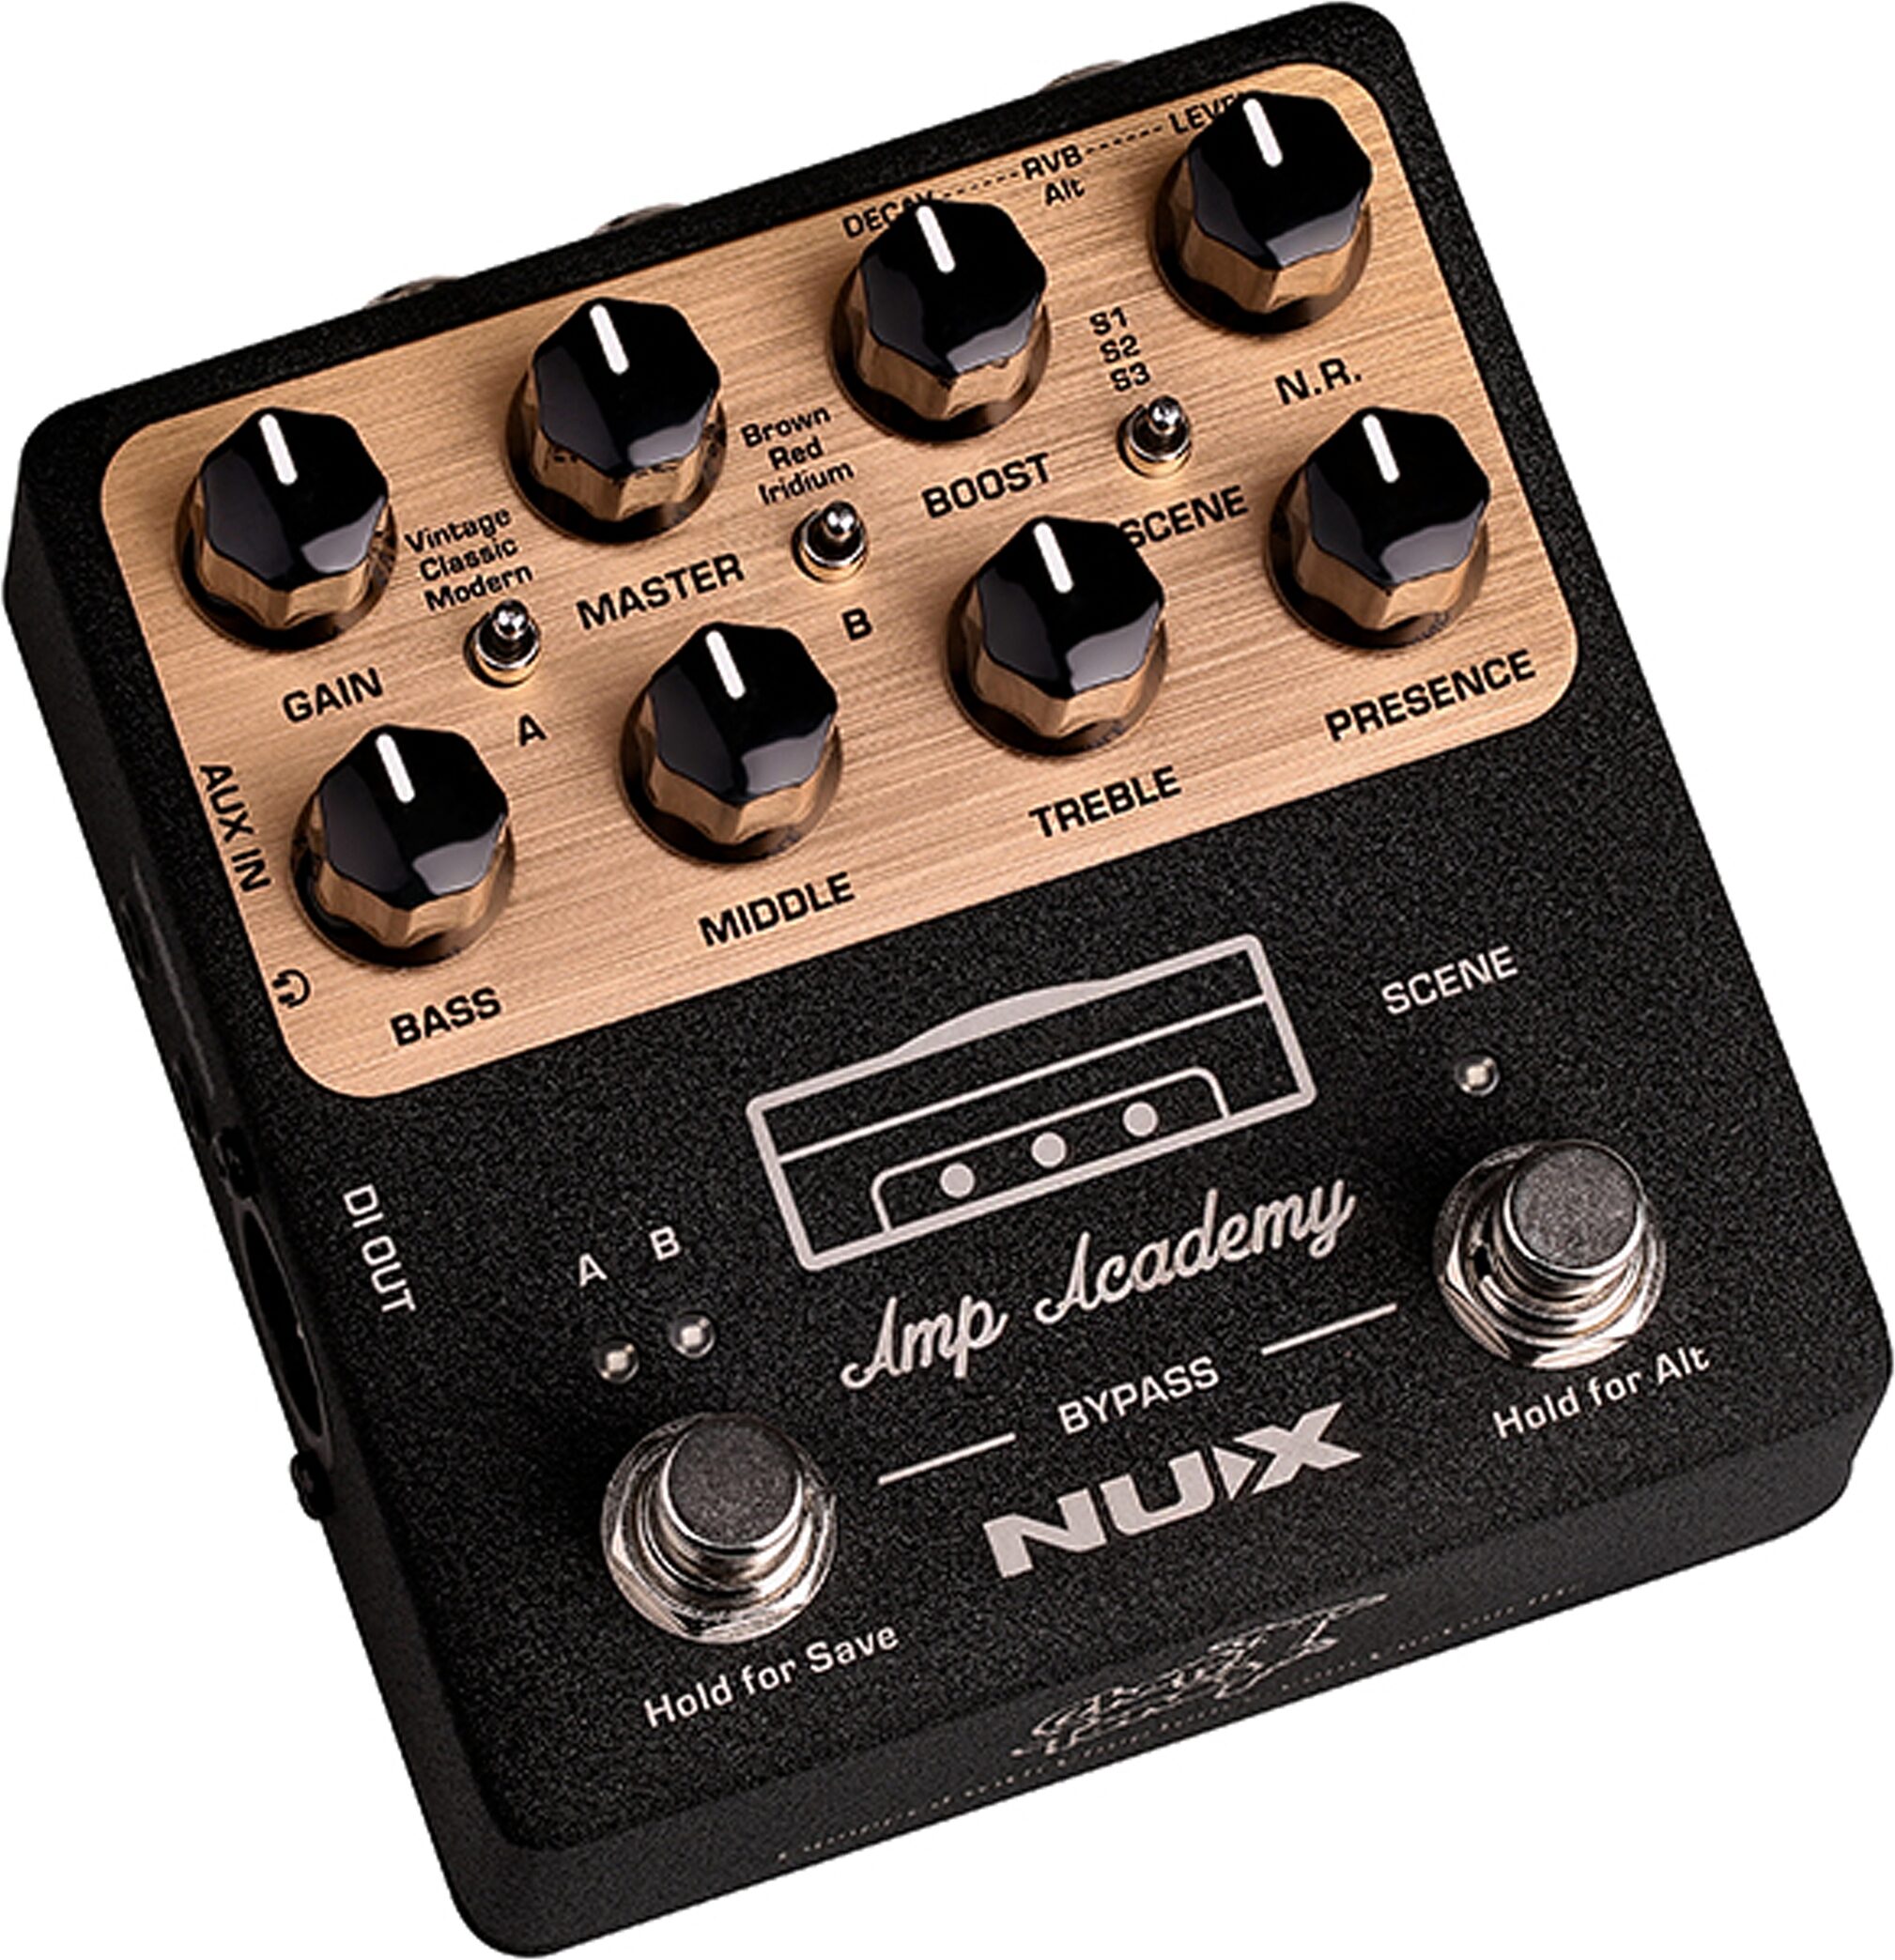 NUX Amp Academy Stomp Box Modeler and IR Loader Pedal